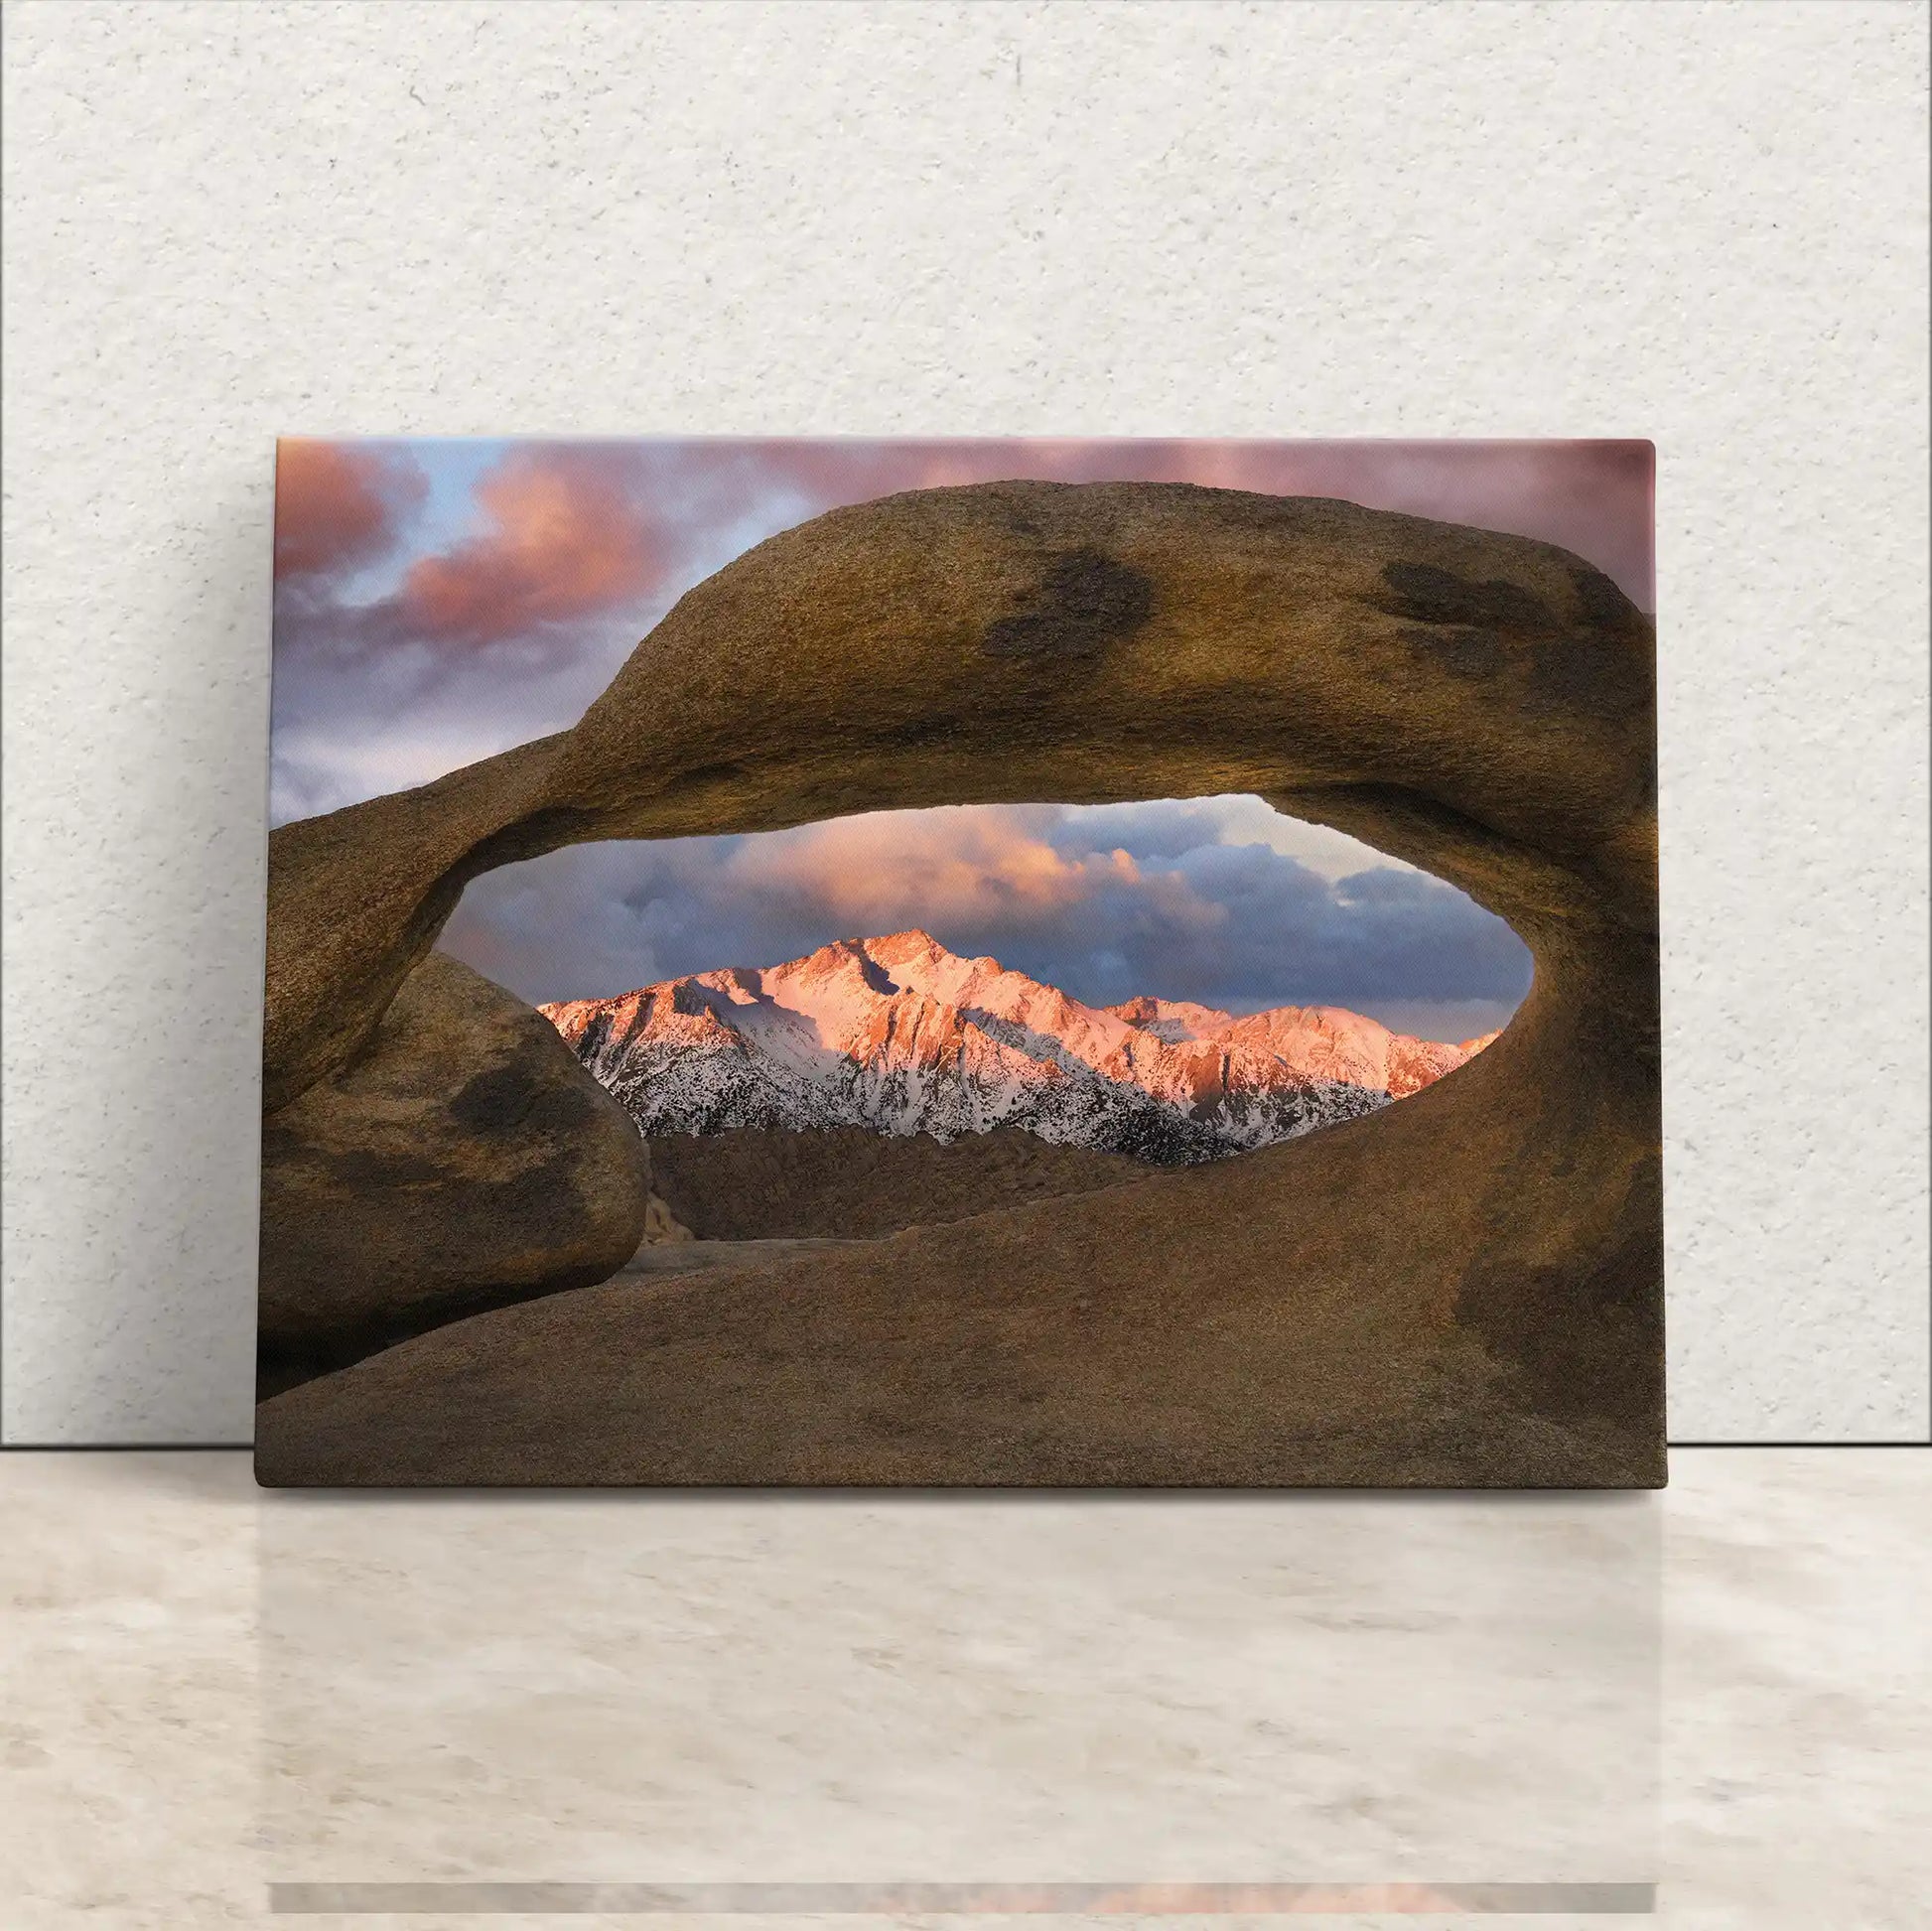 Lone Pine Peak visible through the natural window of Mobius Arch in Alabama Hills, displayed on a canvas leaning against a wall.